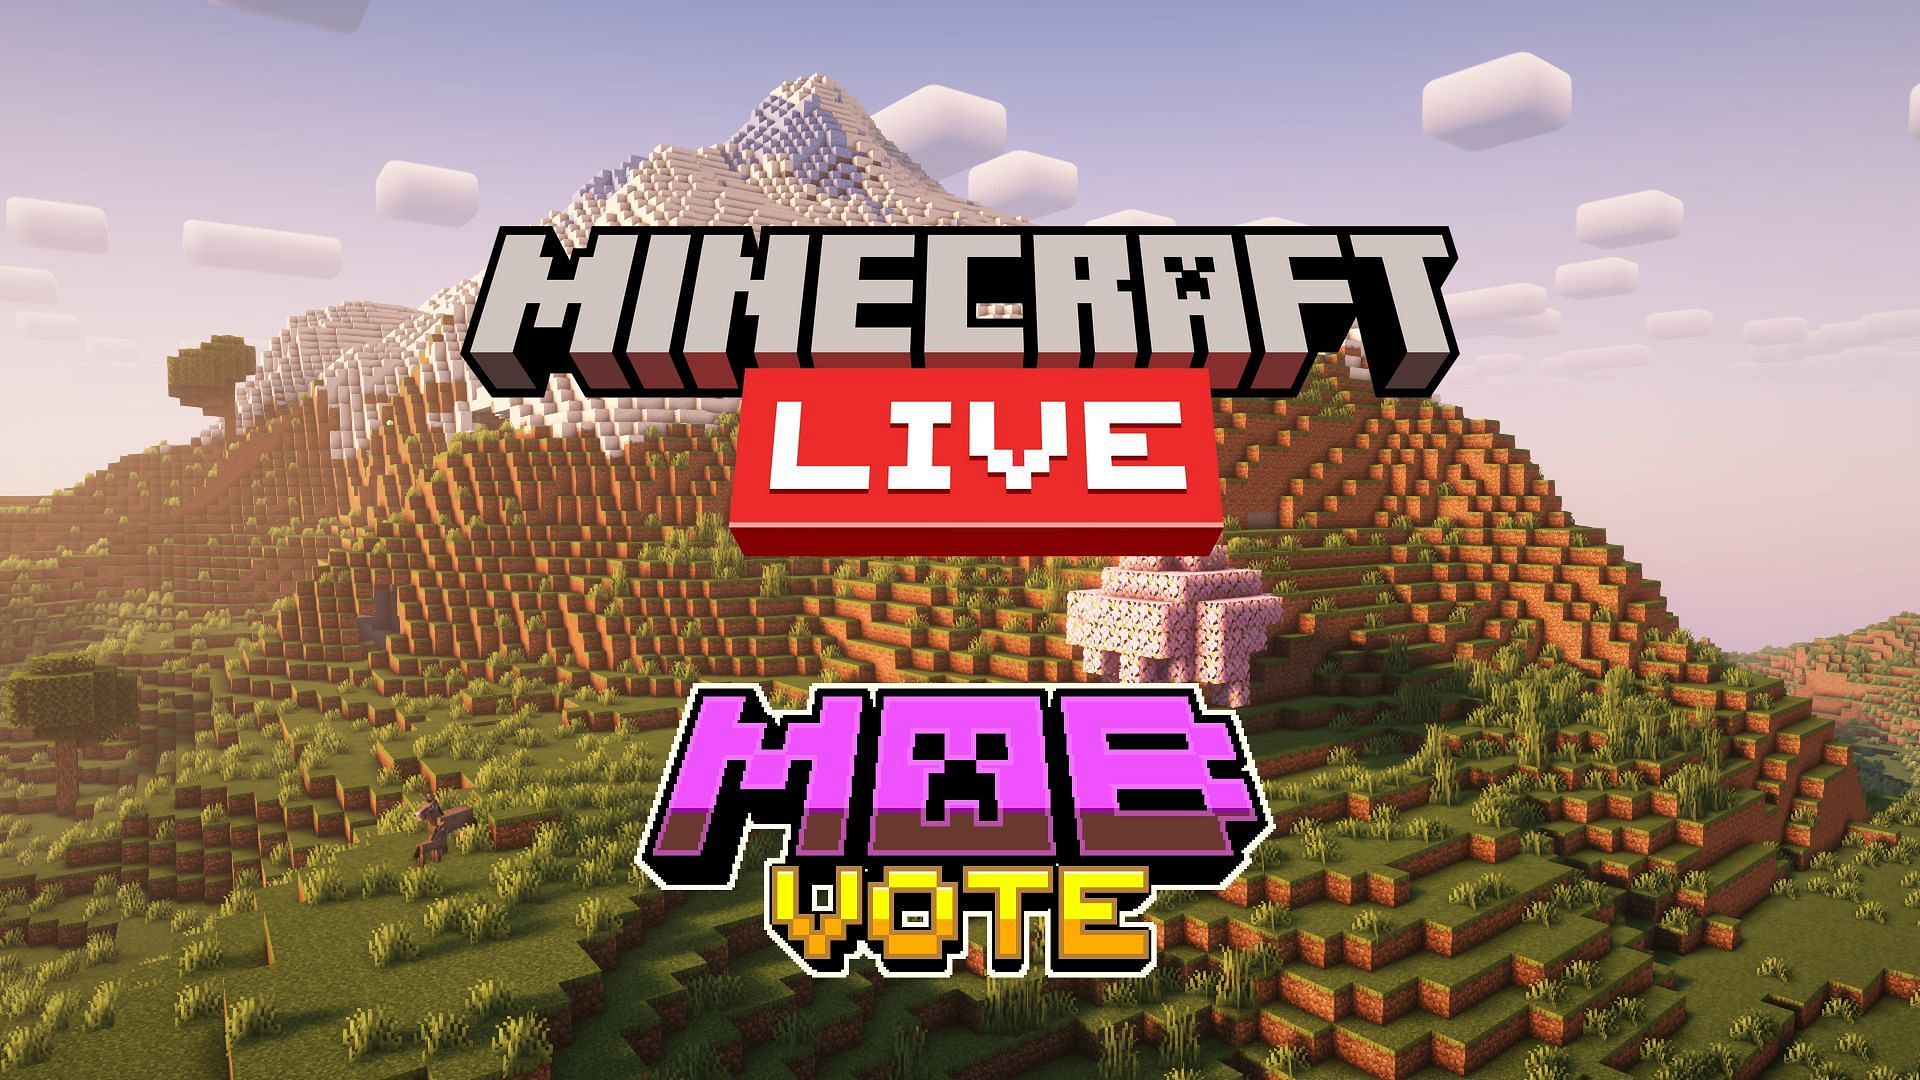 Minecraft mob vote results will be declared at the end of Mojang